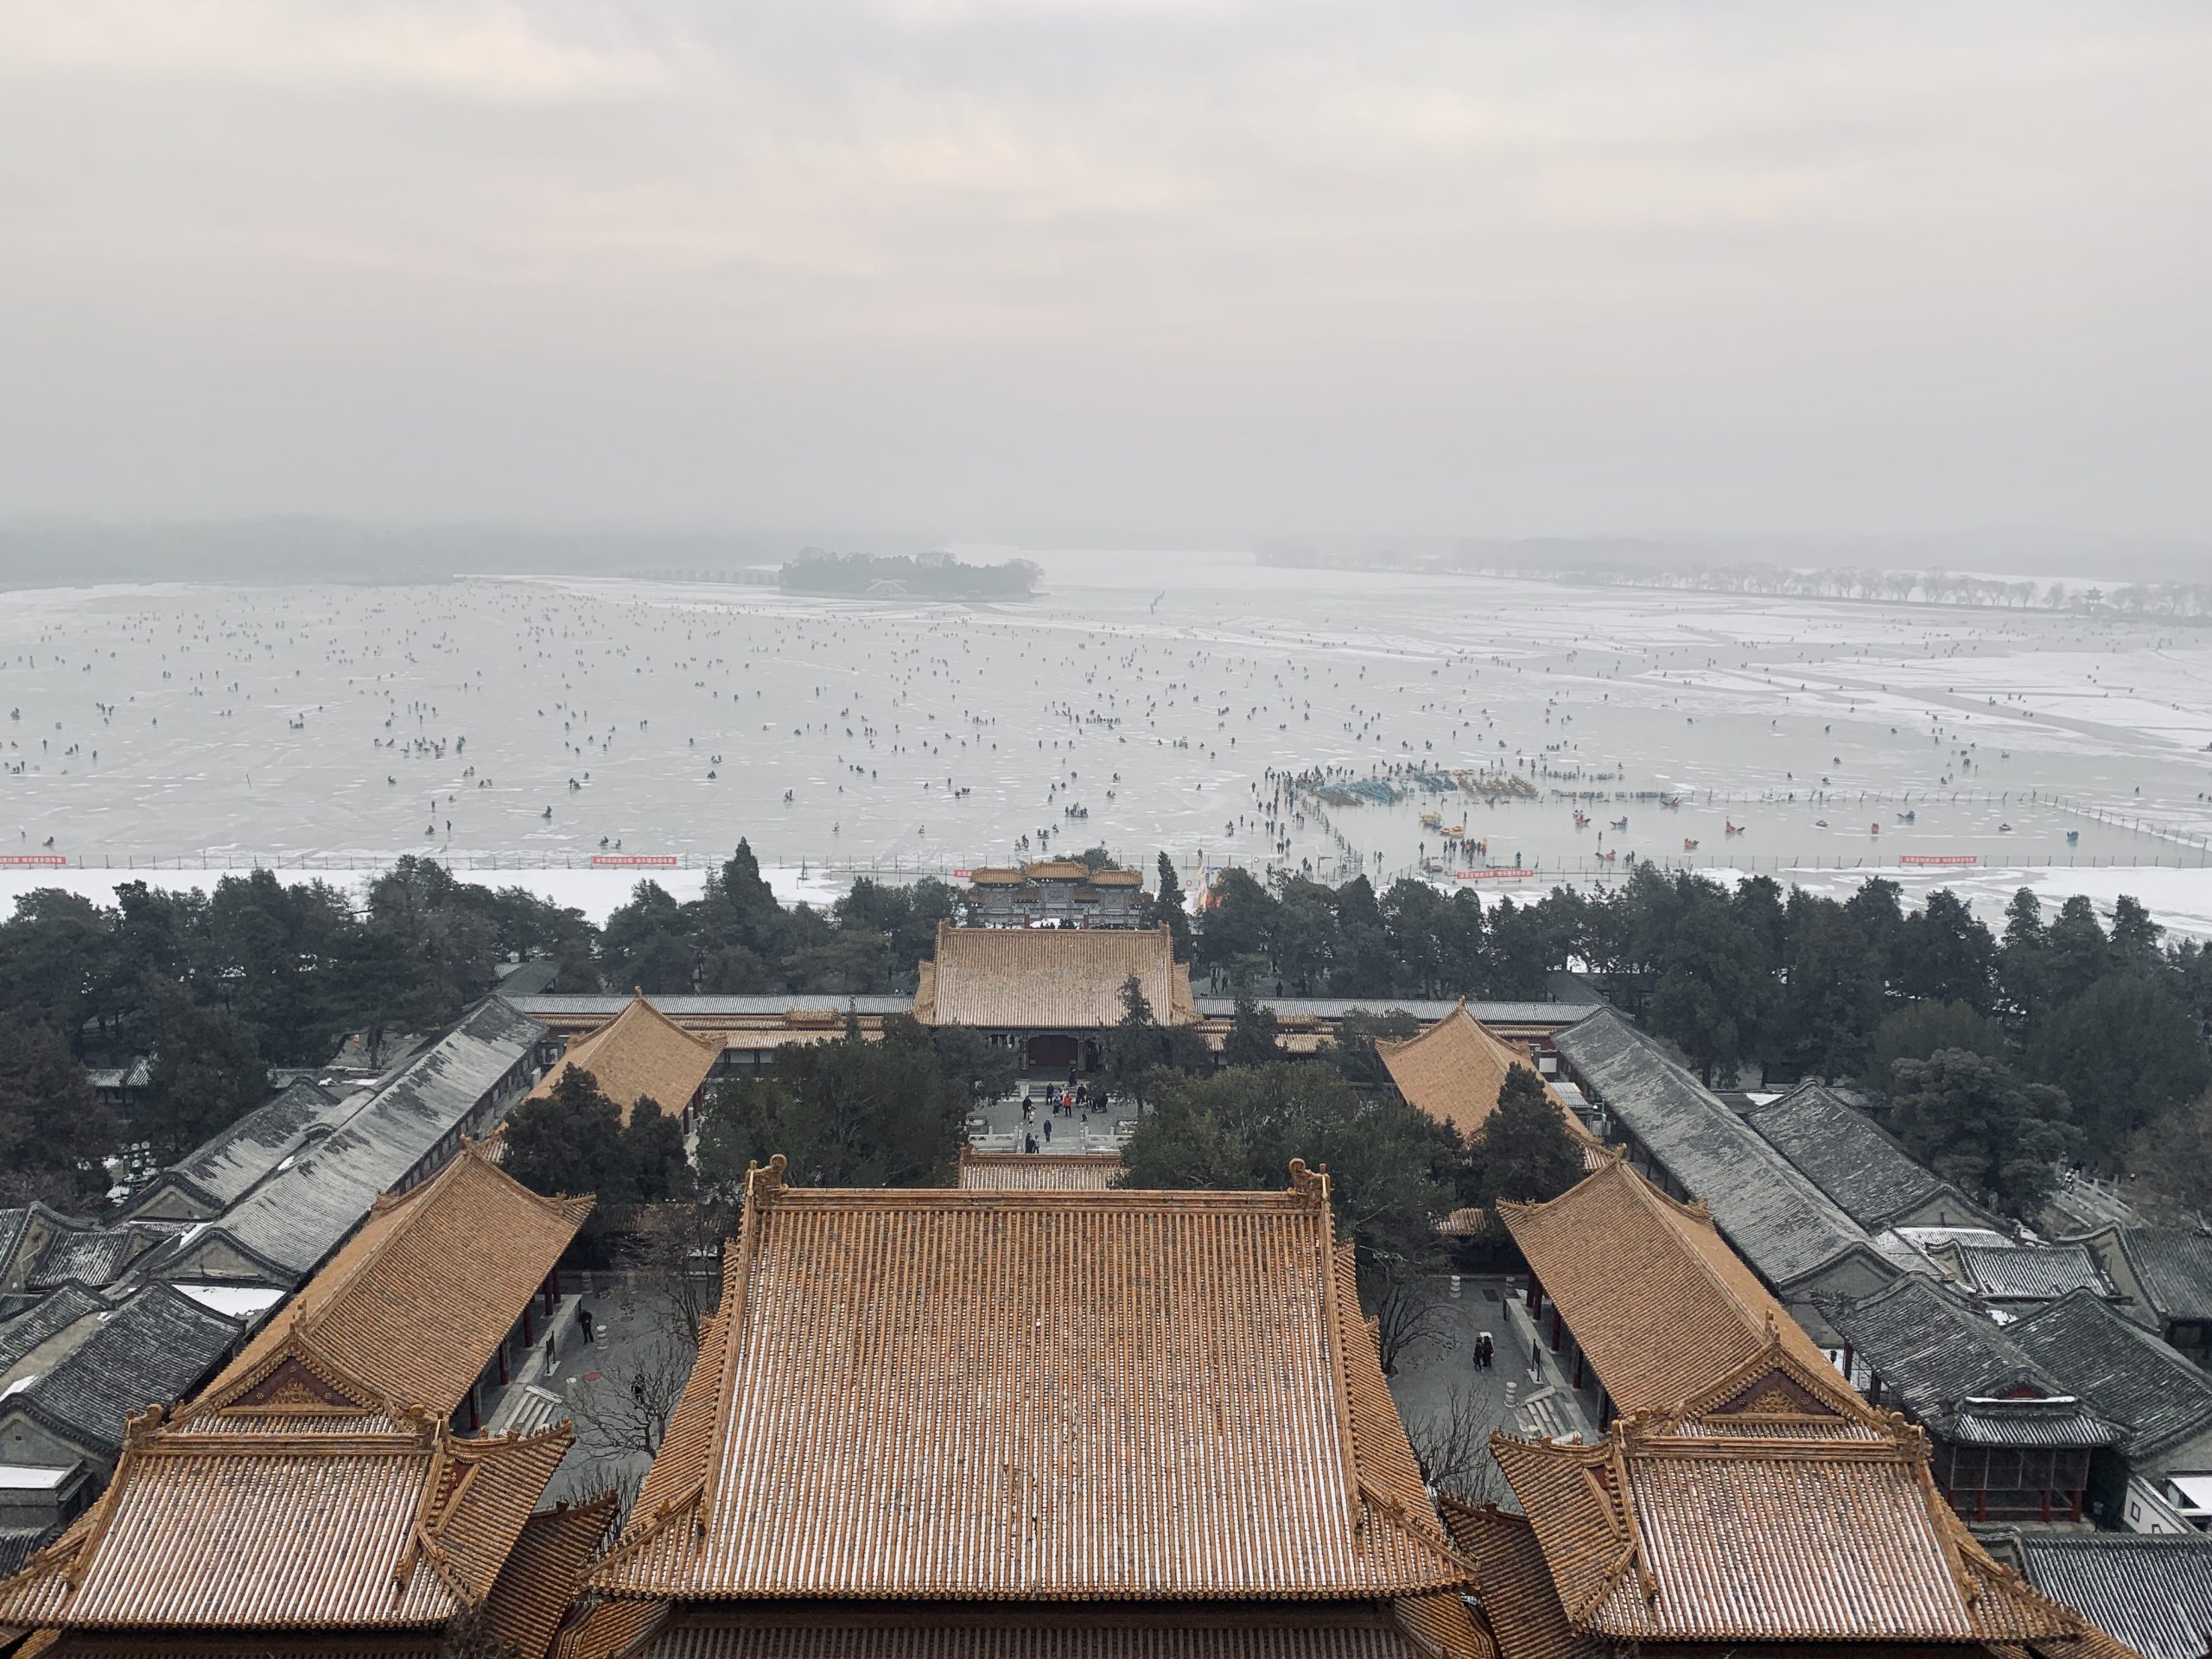 Summer Palace in Winter with a light dusting of snow on the roof.